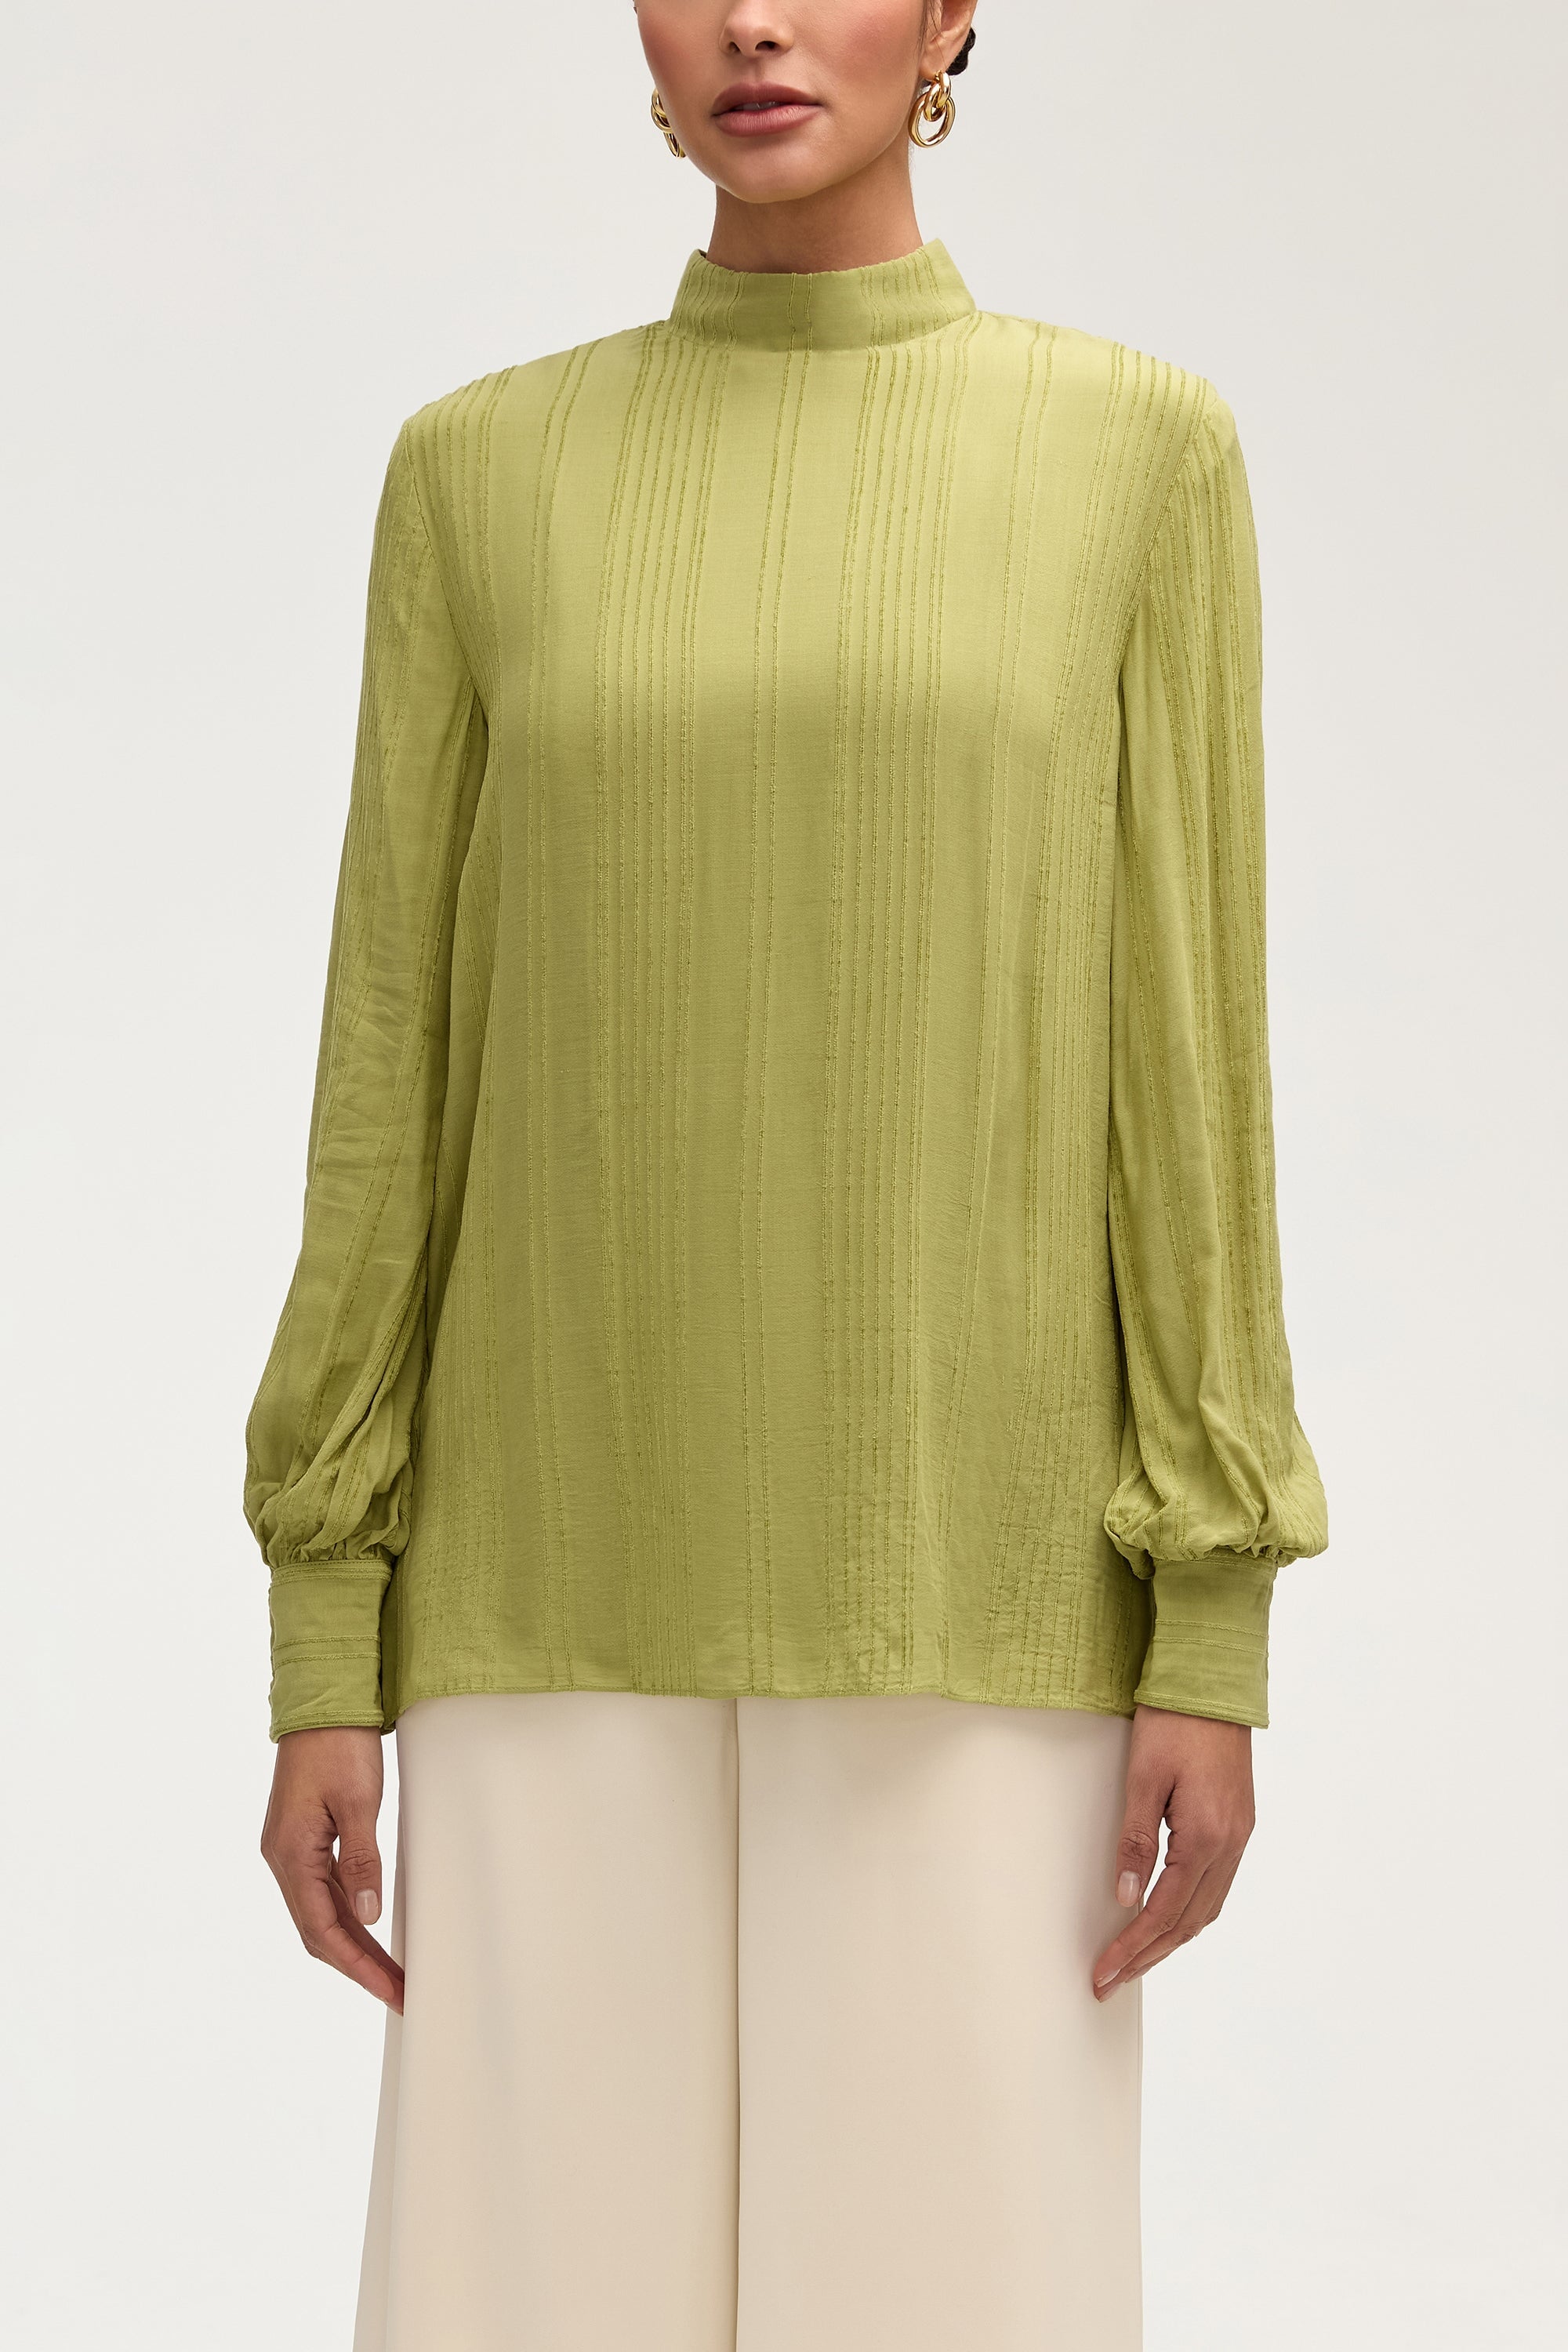 Textured Rayon Balloon Sleeve Blouse - Fern Green Tops Veiled Collection 